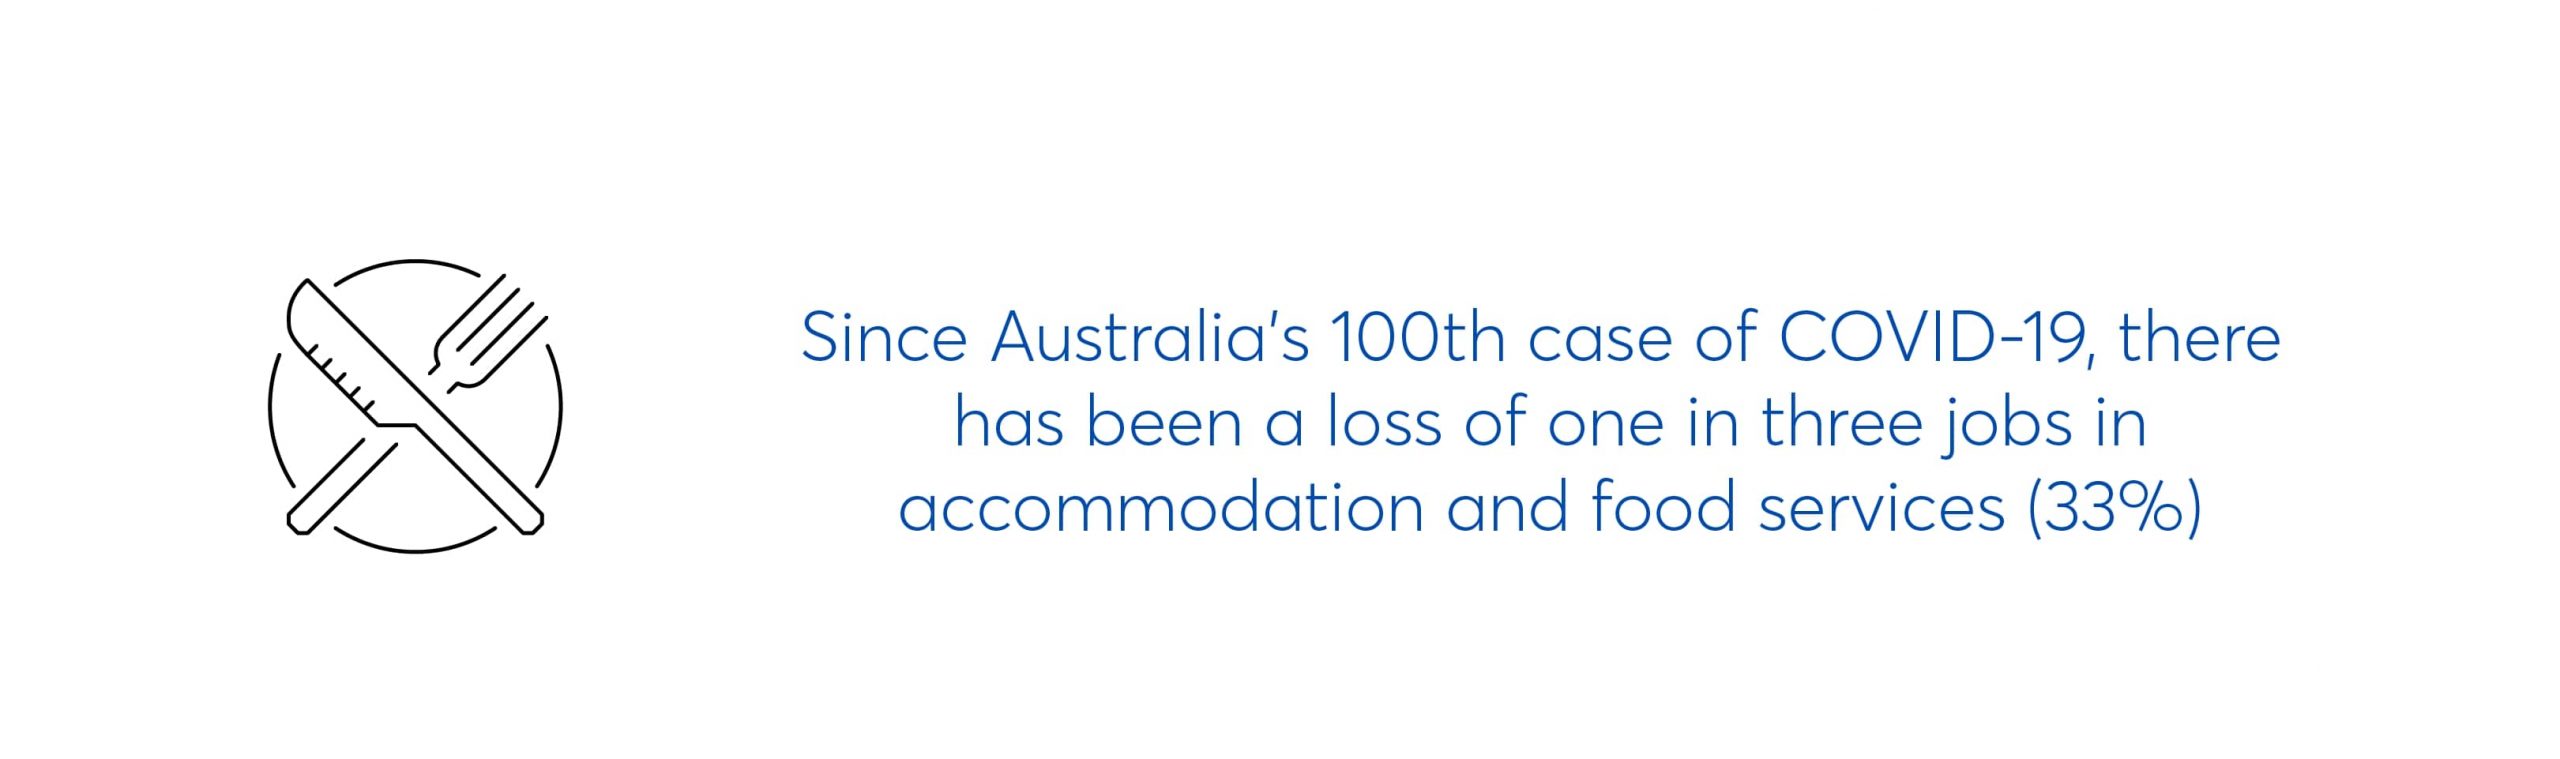 text image which says since australia's 100th case of covid19, there has been a loss of one in three jobs in accomodation and food services (33%)